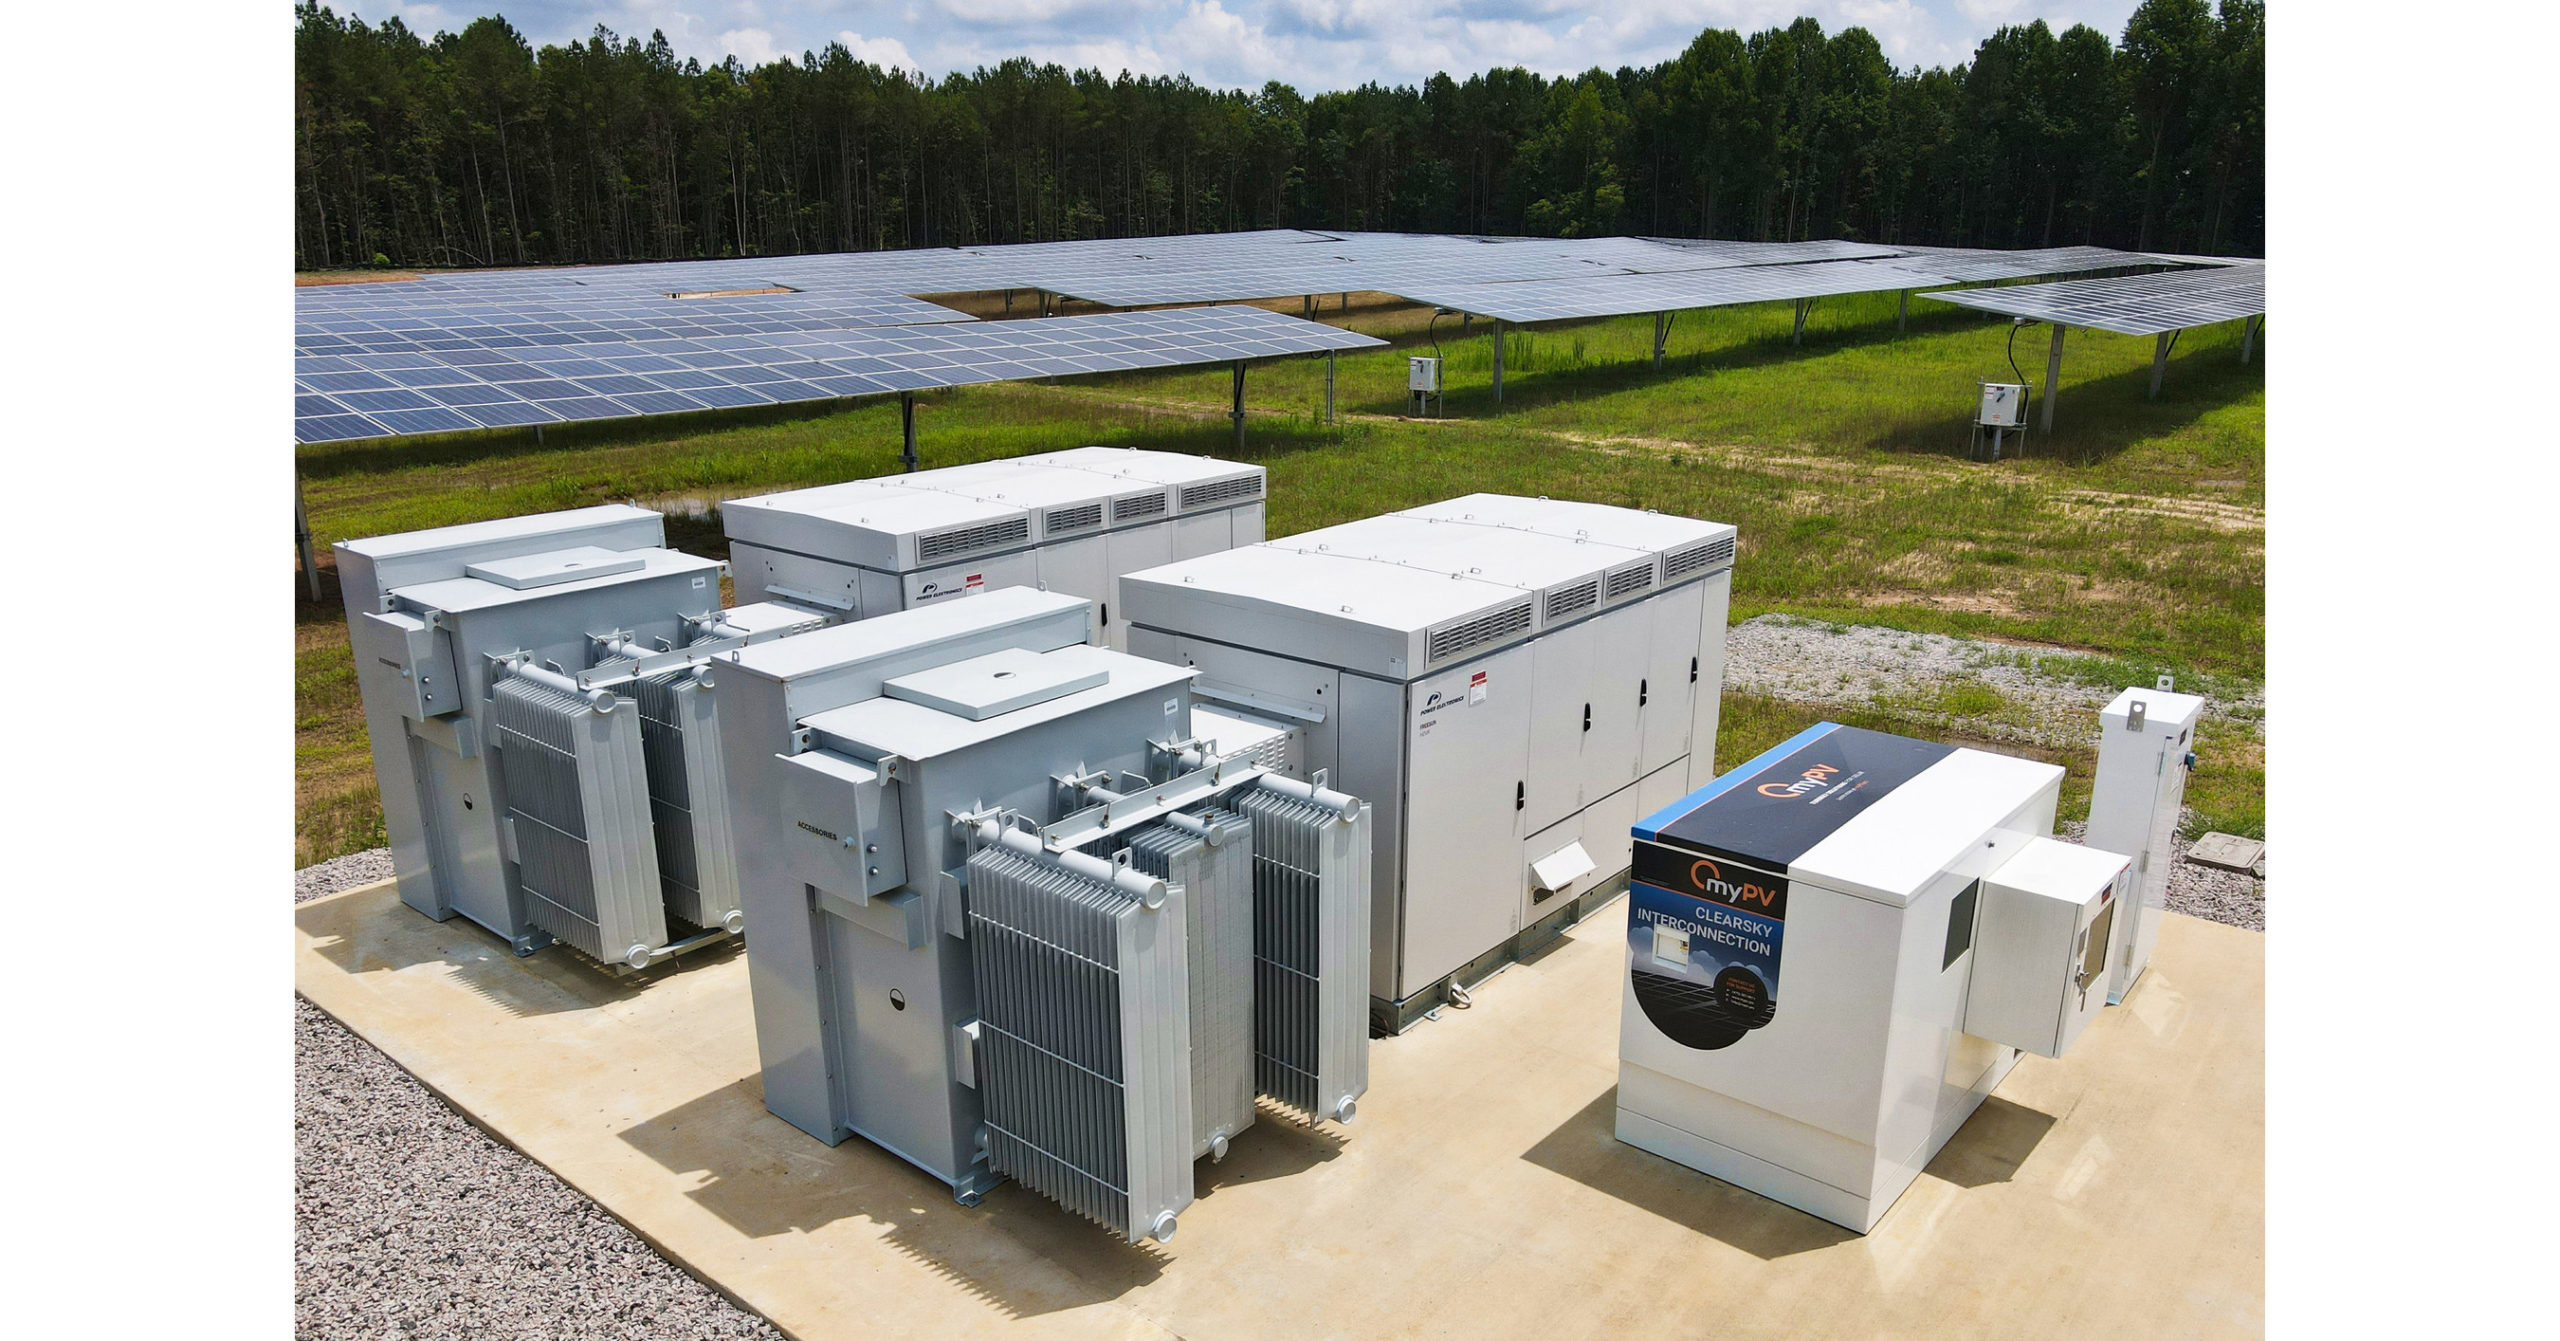 Interconnection Innovation Solves Current Inrush Problem at PV Solar + Storage Site in NC - PRNewswire